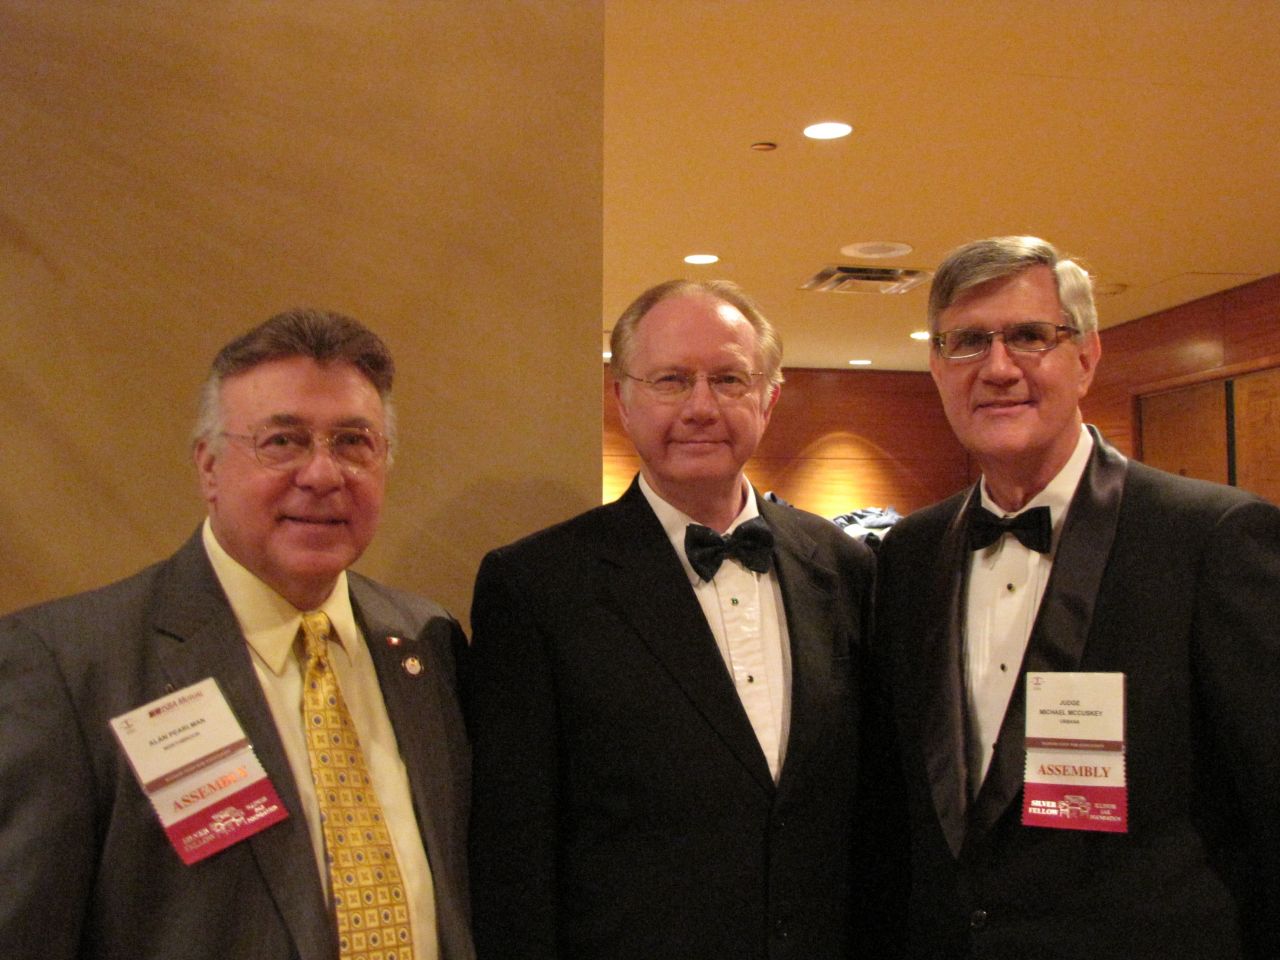 Alan Pearlman (left), State Supreme Court Justice Thomas Kilbride and U.S. Central District Chief Judge Michael McCuskey attend the Opening reception.